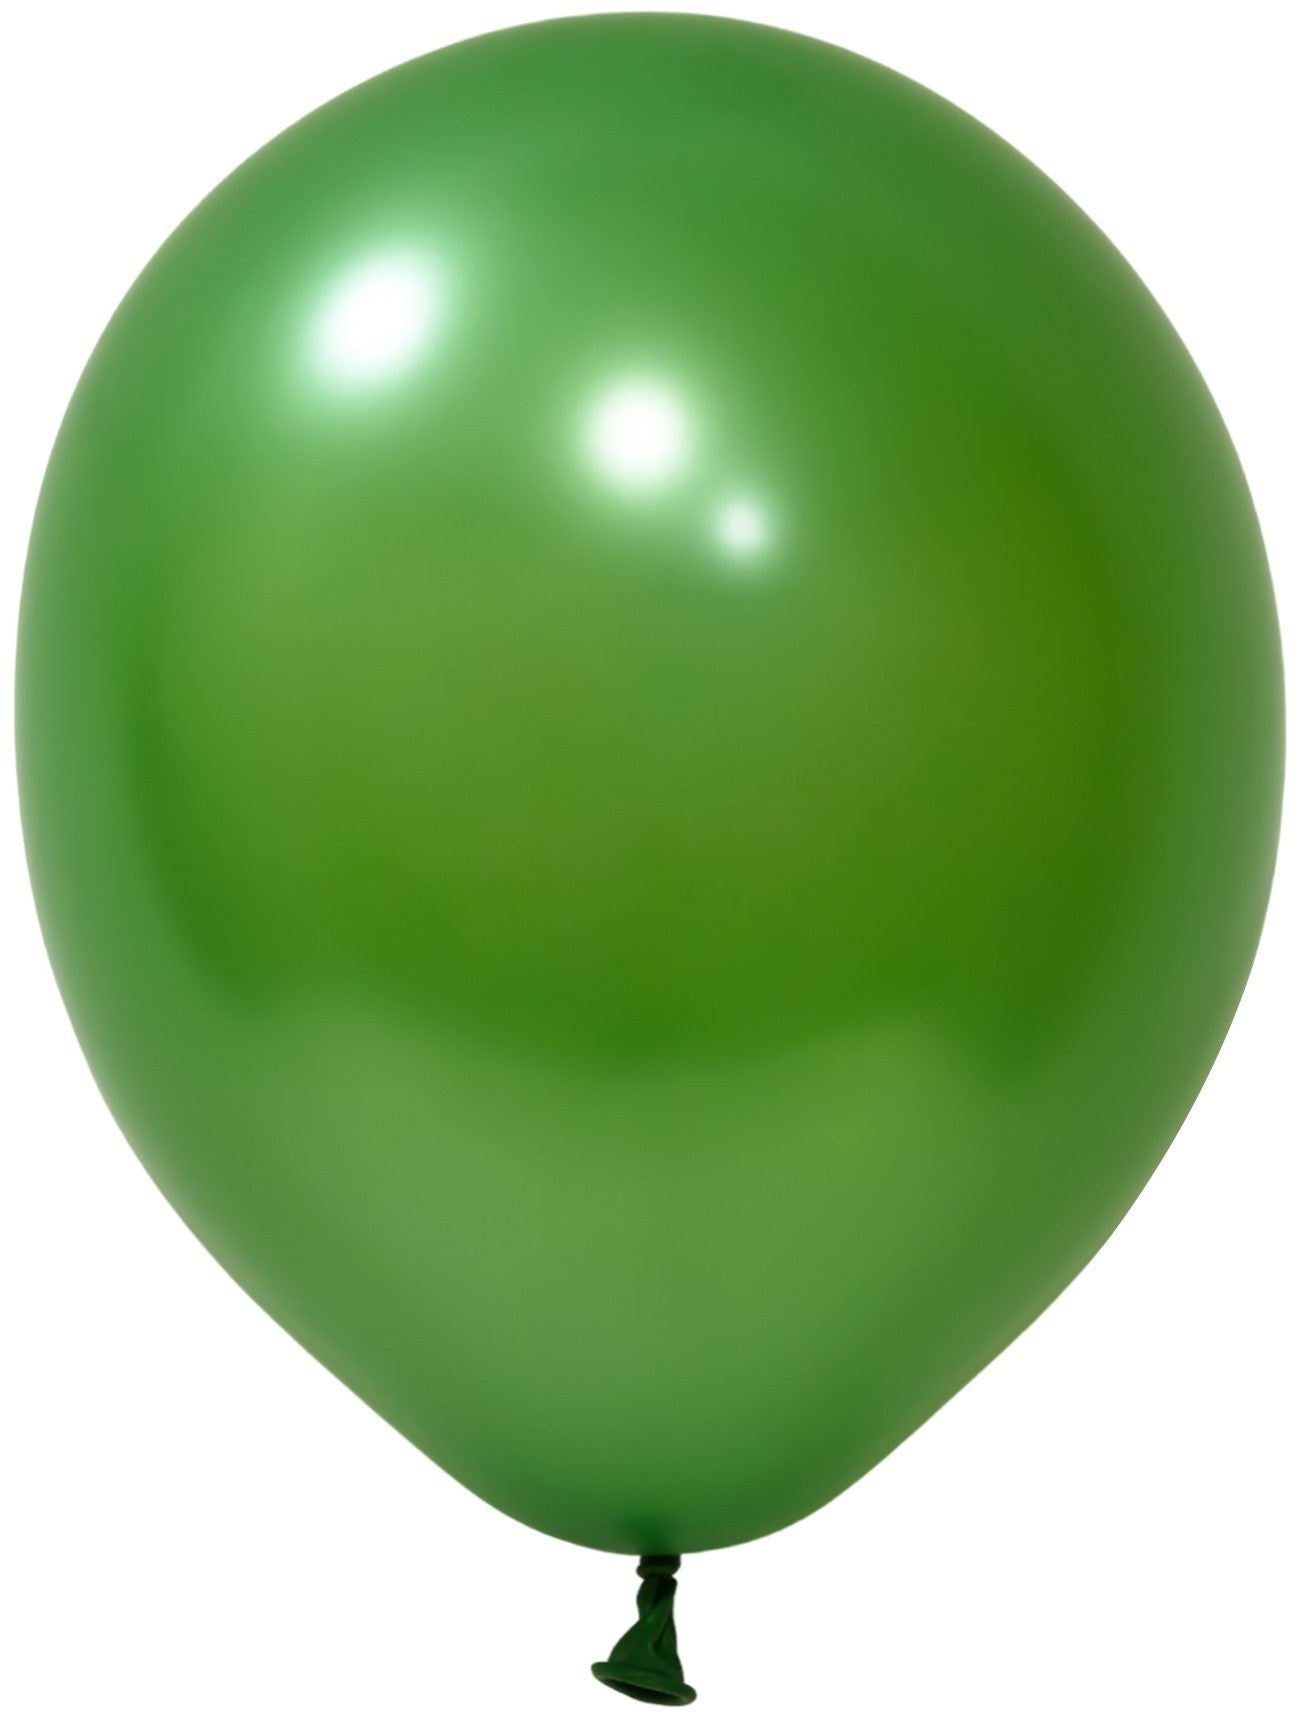 View Green Metallic Latex Balloon 10inch Pack of 100 information